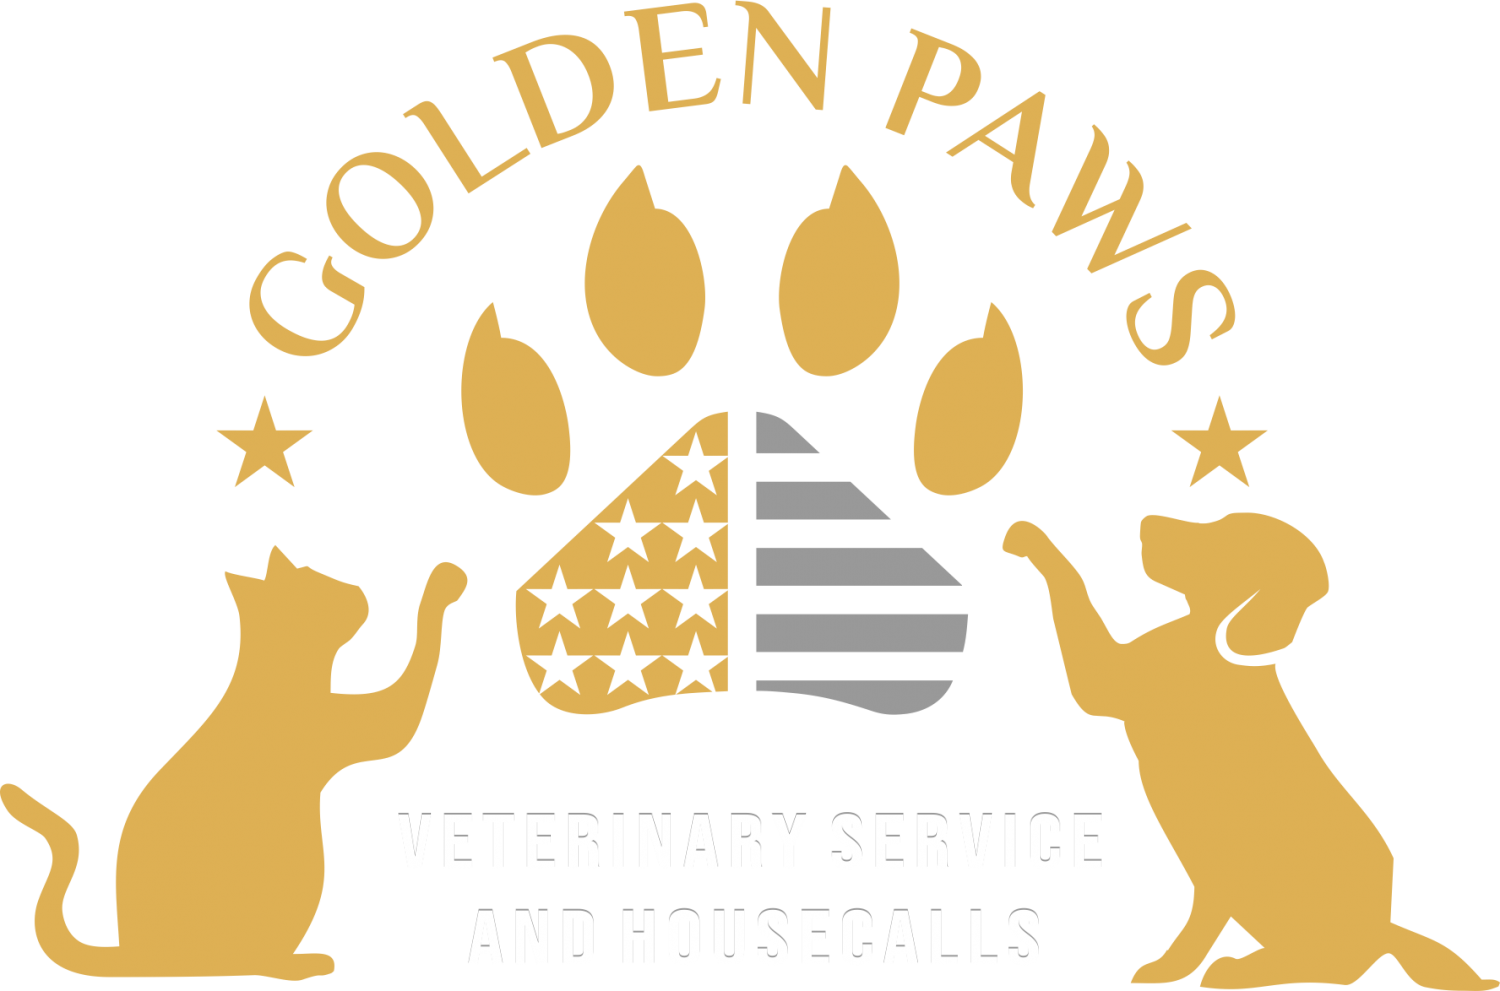 Golden Paws Veterinary Service and Housecalls Logo